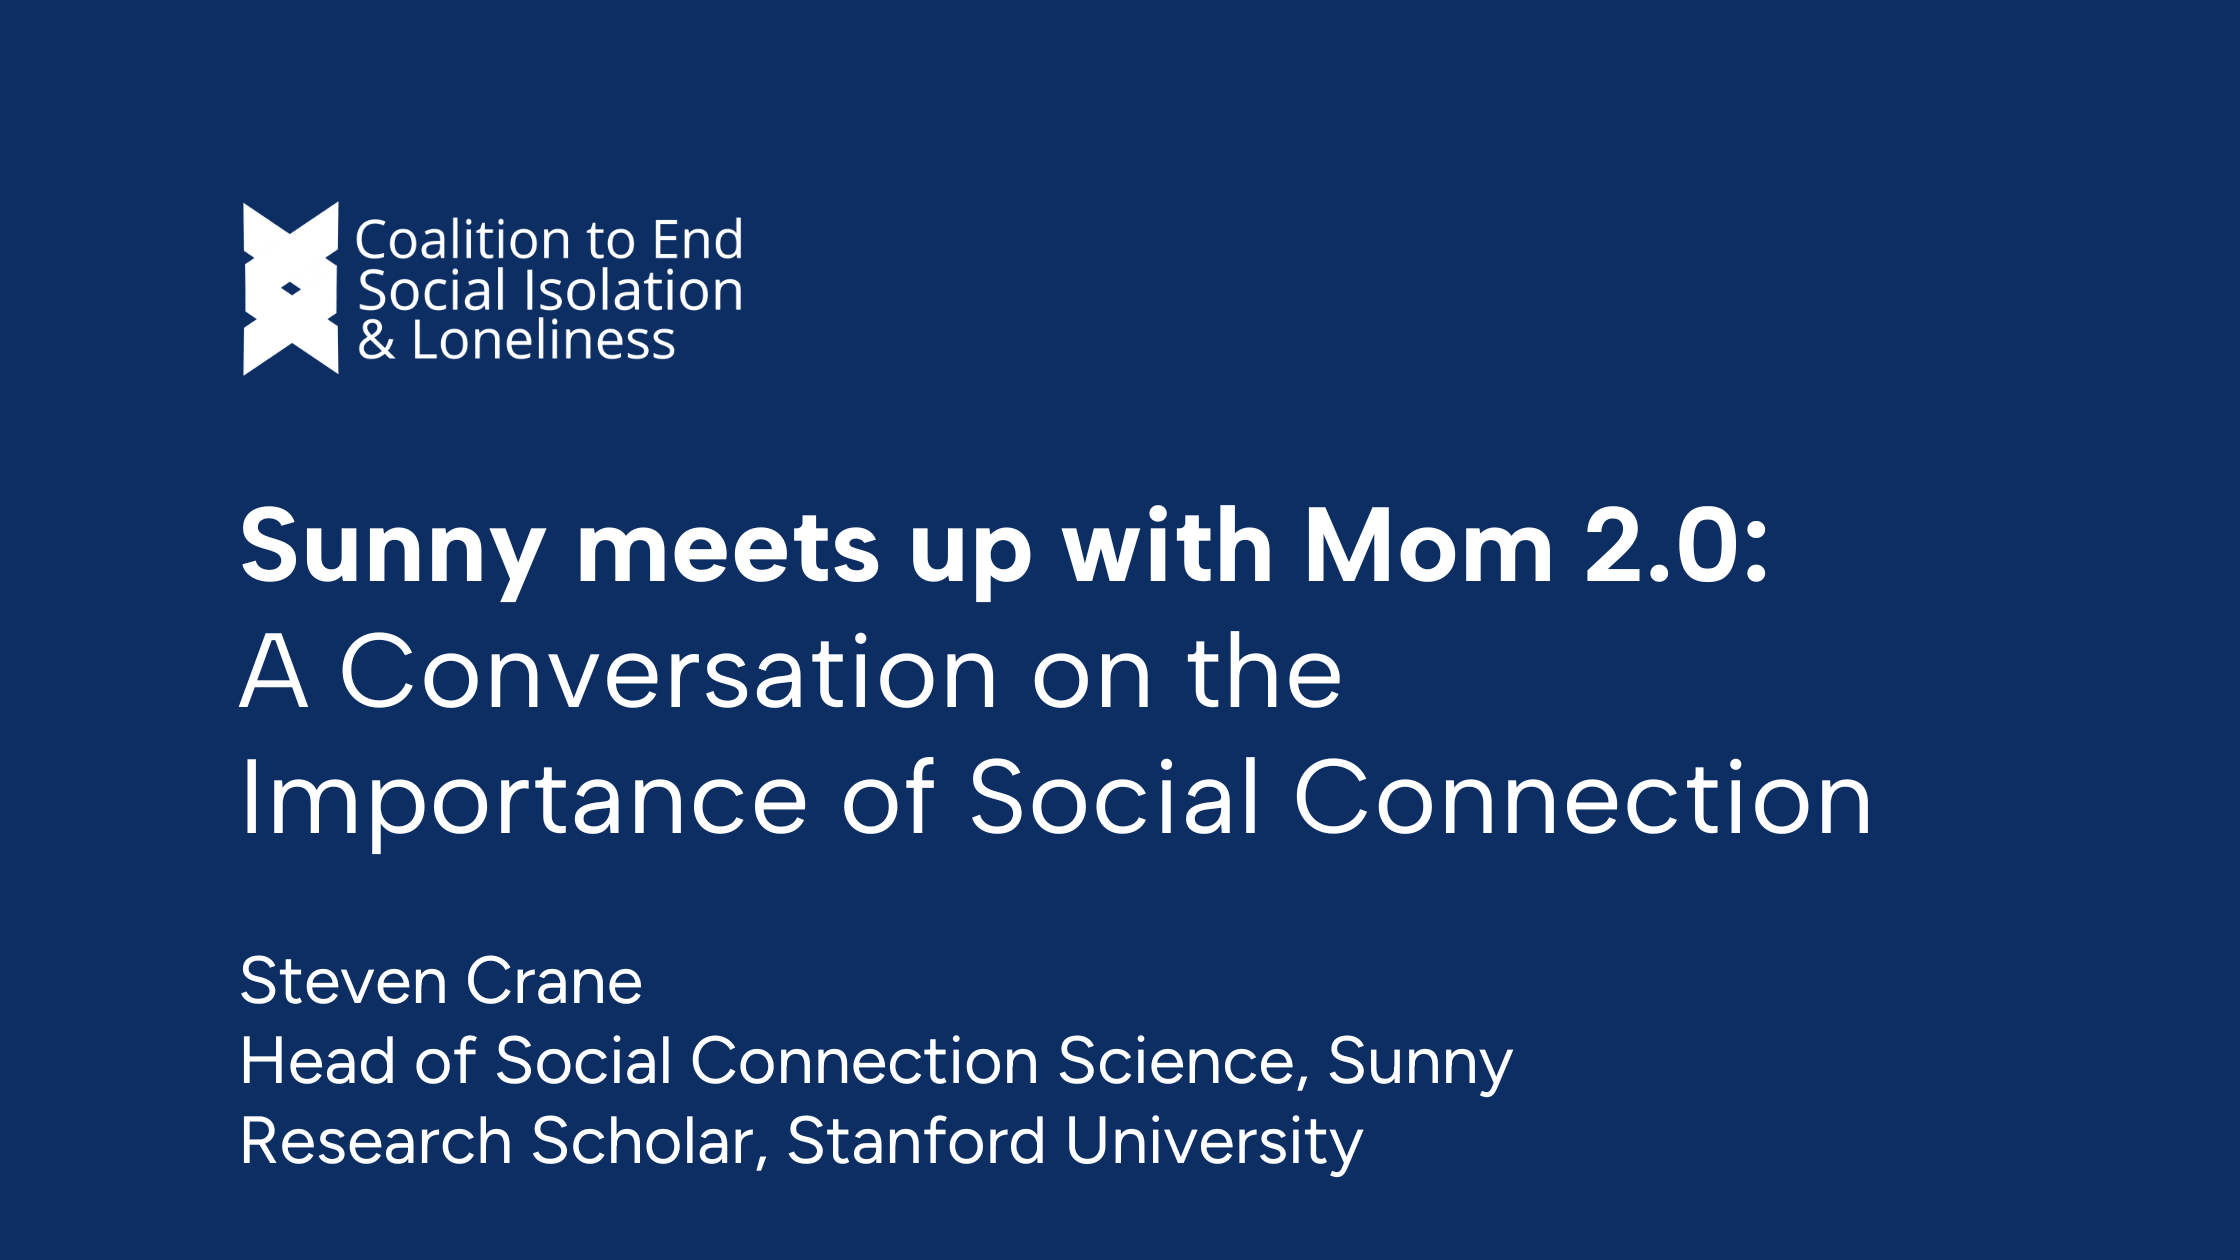 Sunny meets up with Mom 2.0: A Conversation on the Importance of Social Connection